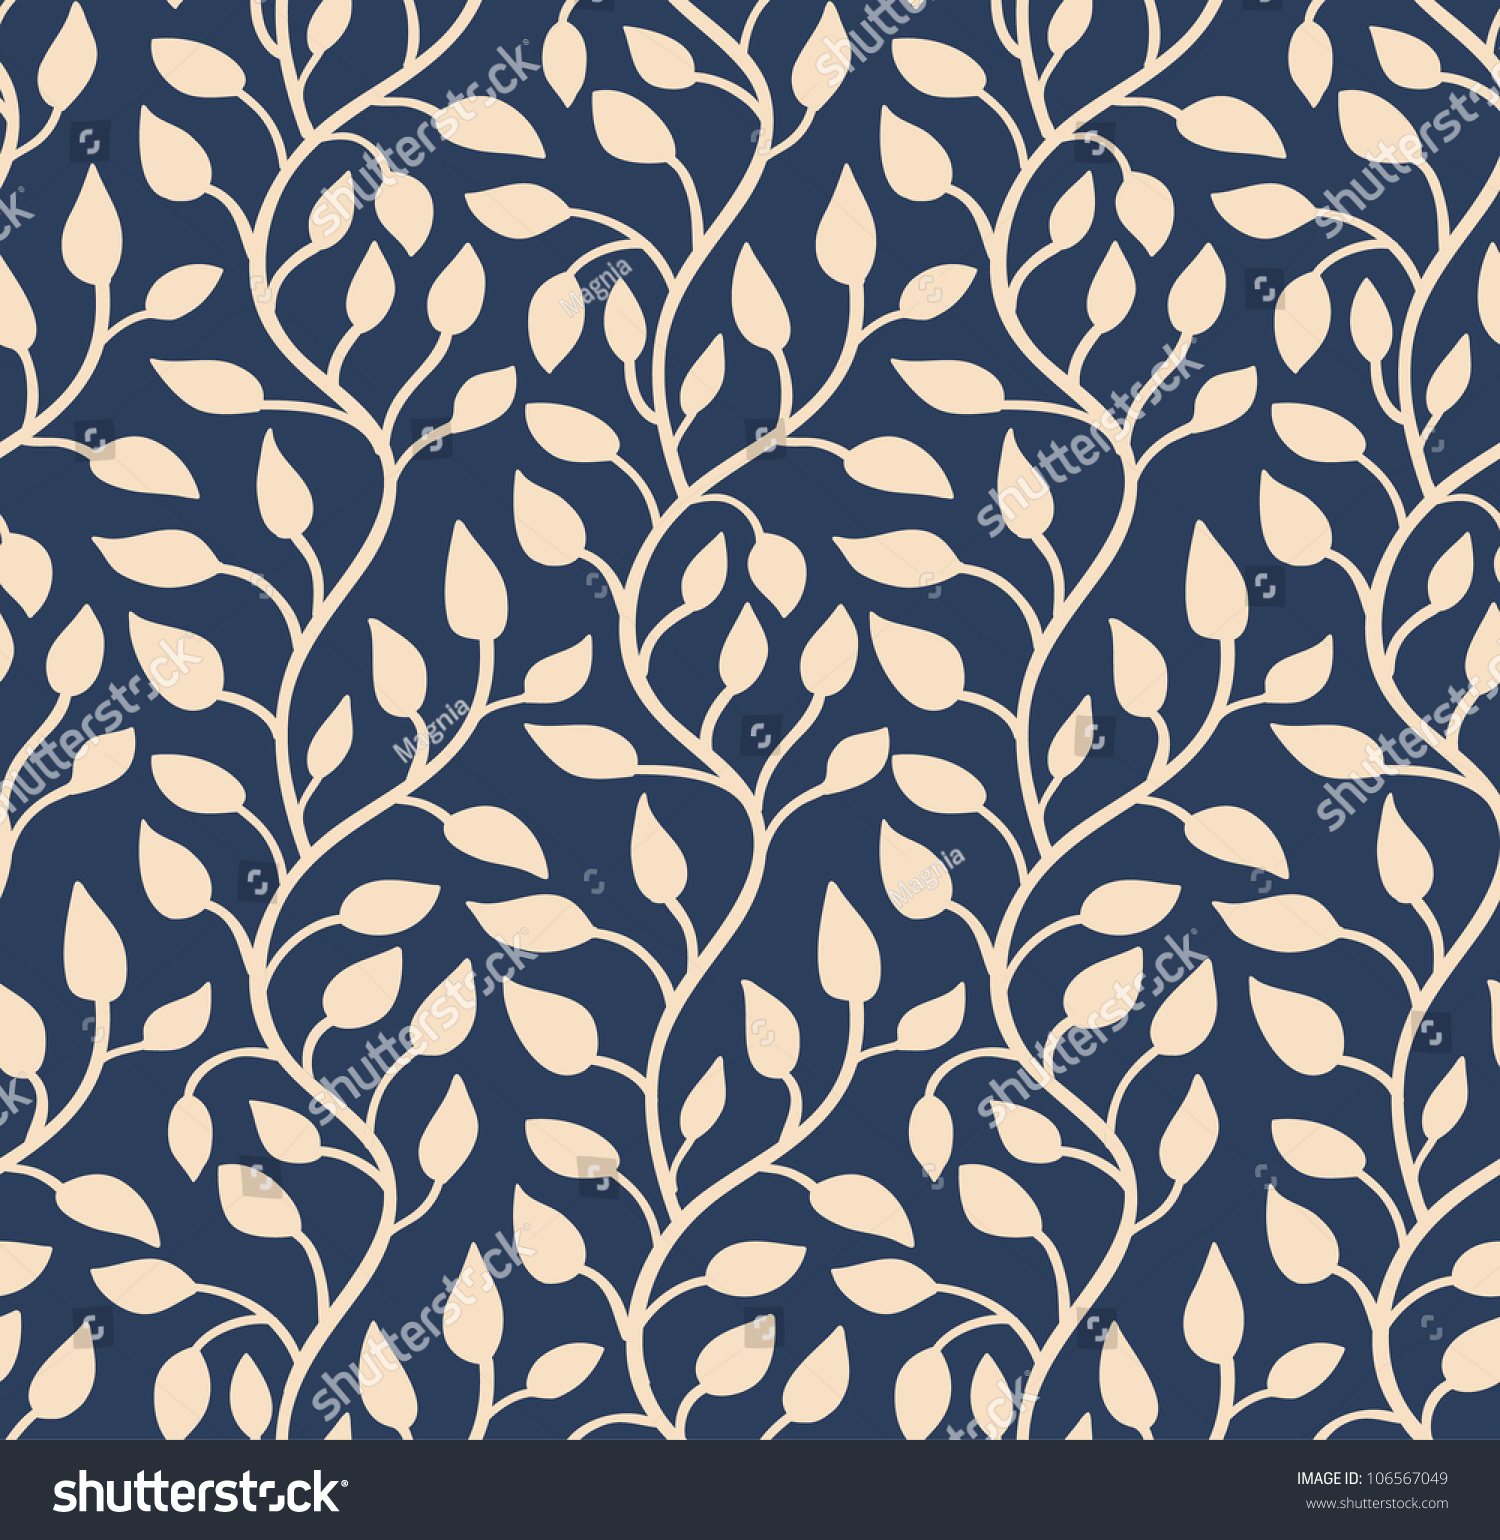 Seamless Stylish Blue Leaf Pattern Vector Stock Vector 106567049 ...